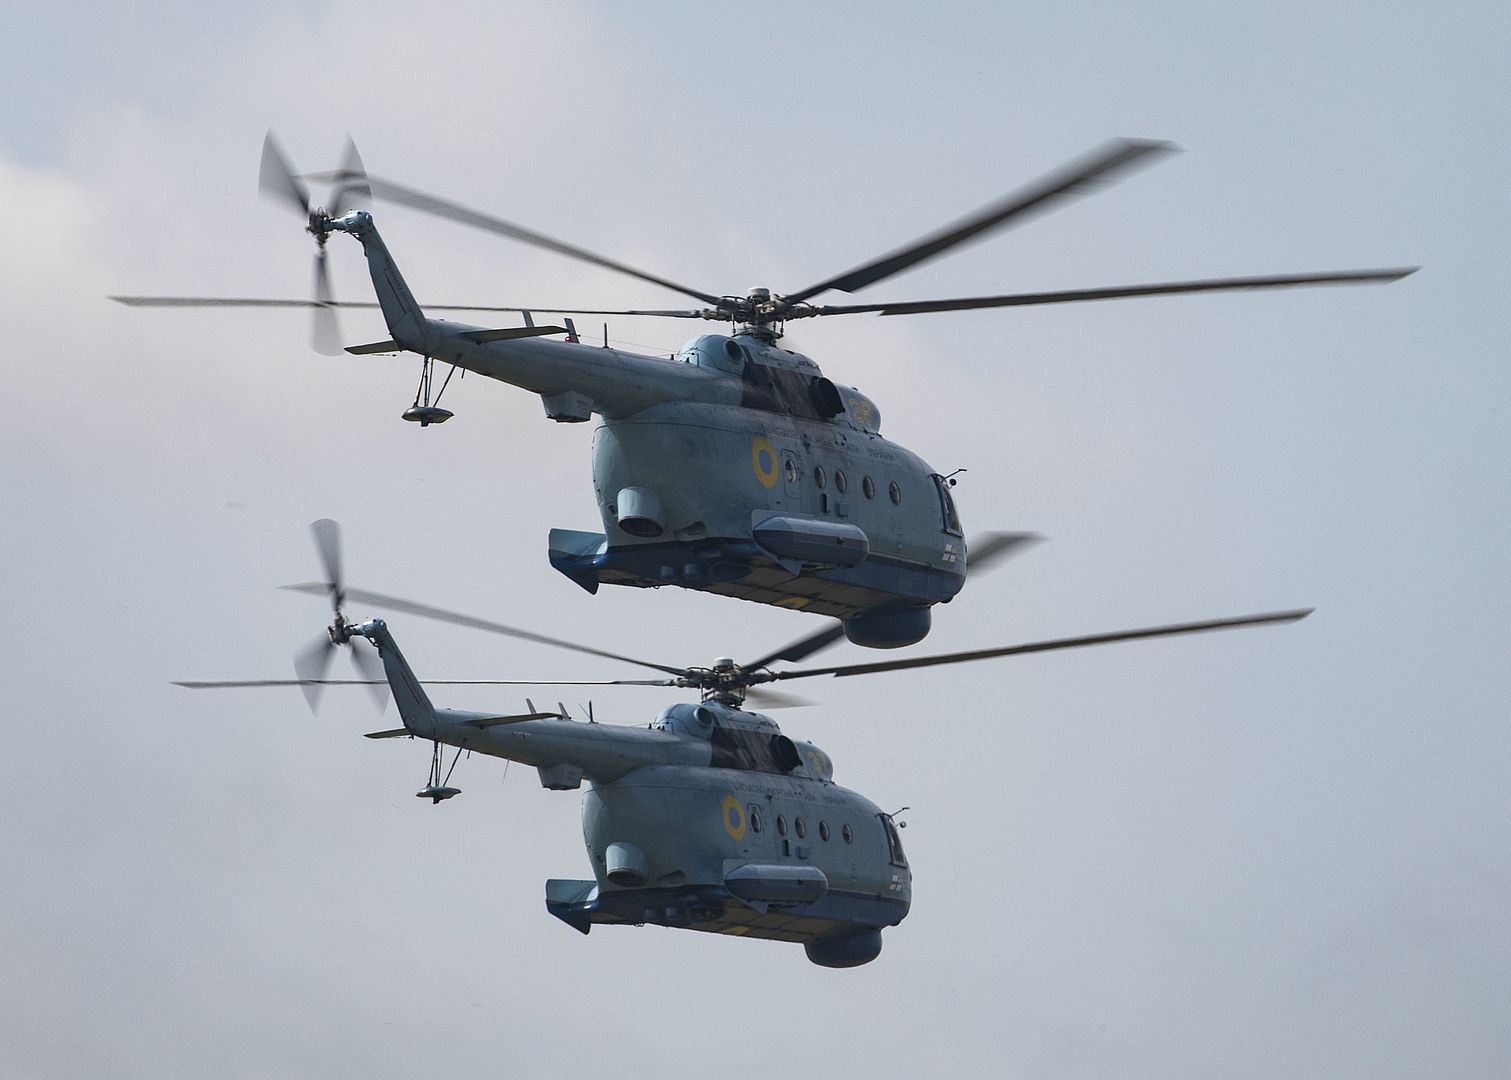 8 Helicopters Fly In Formation During An Air Demonstration Portion Of Exercise Sea Breeze 2021 On Mykolaiv Military Airbase Ukraine